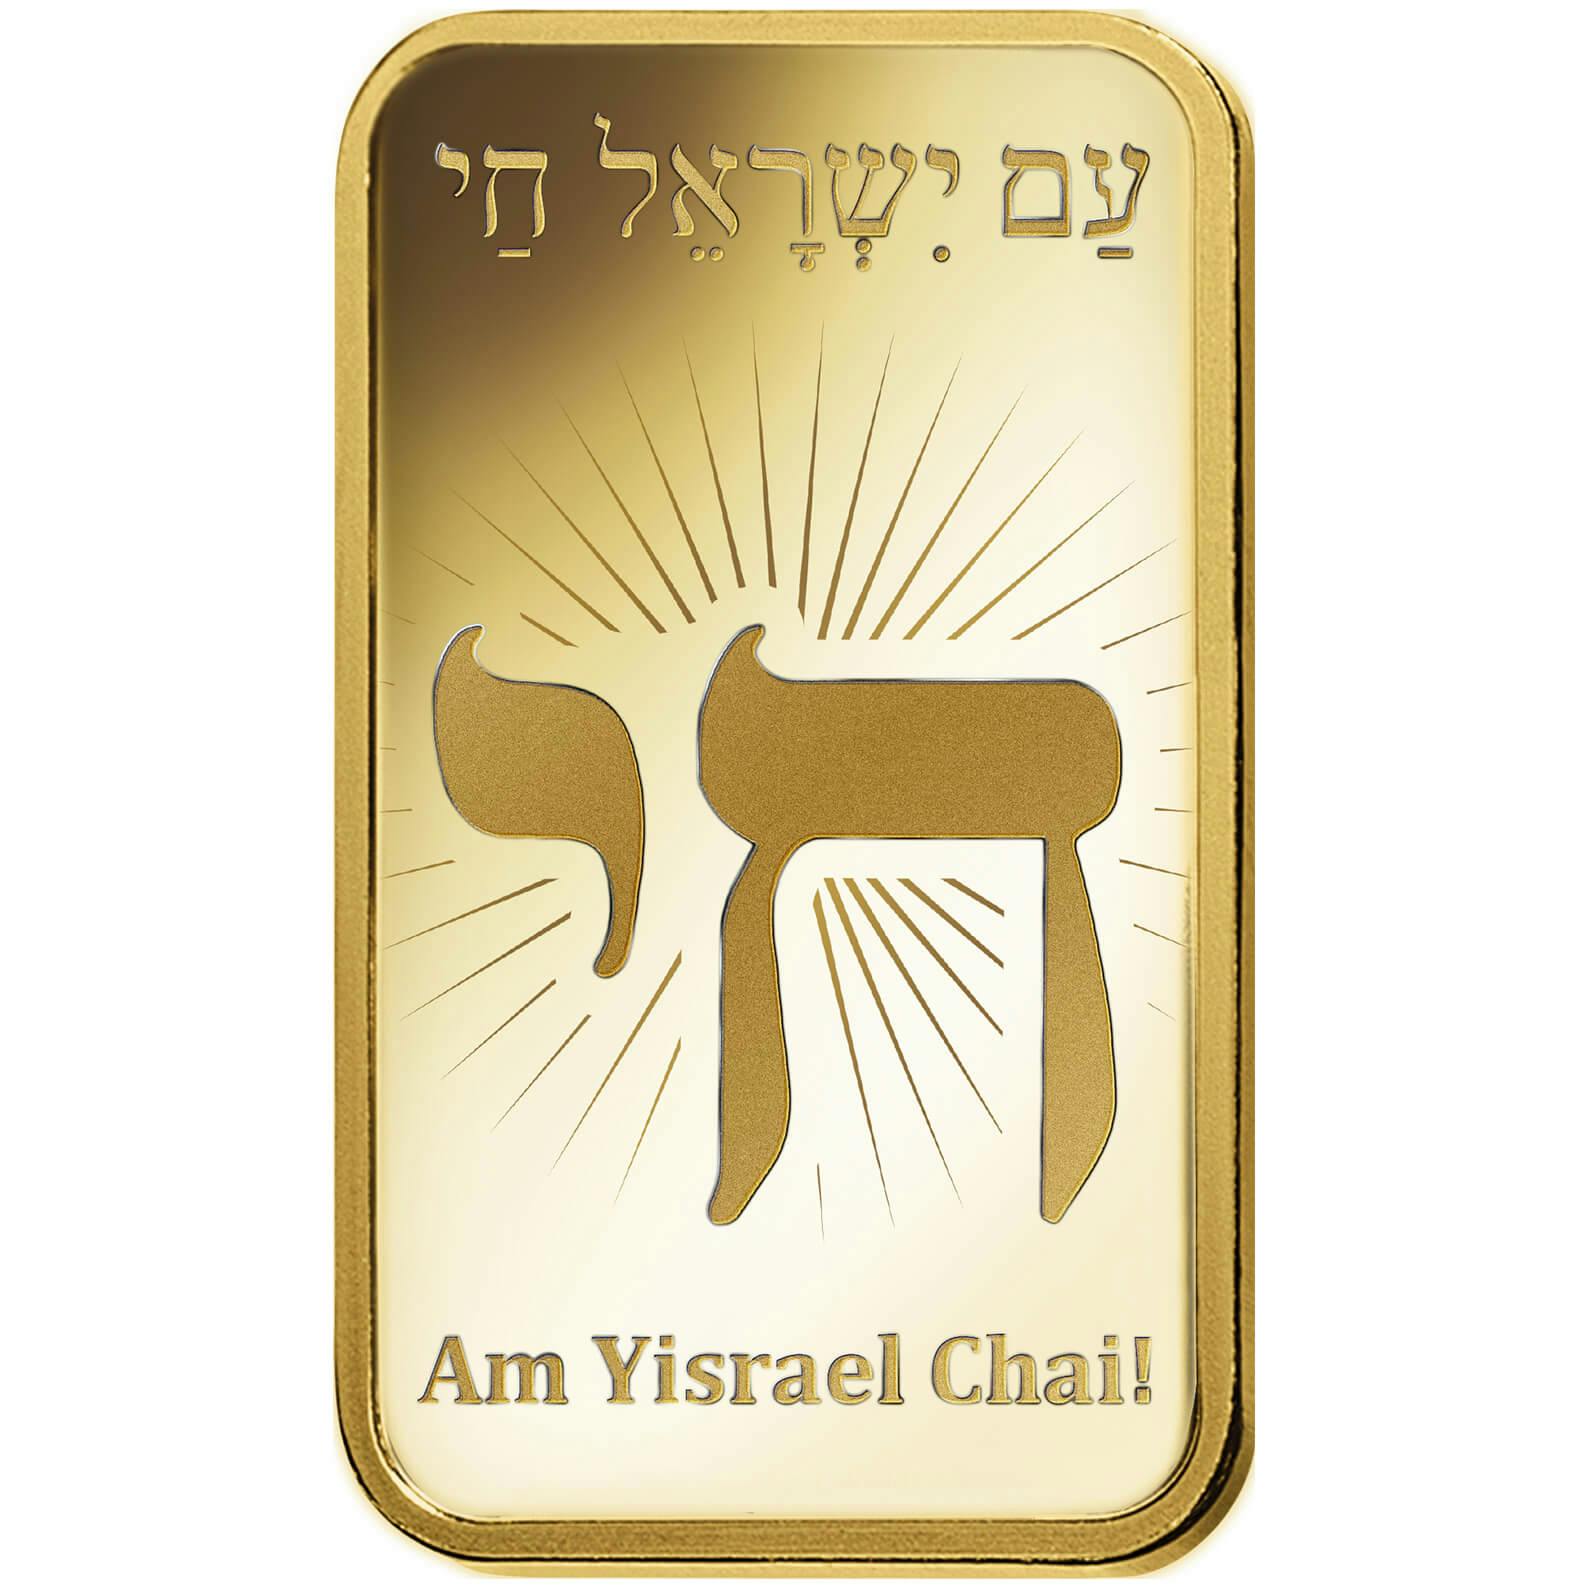 Achat d'or, 10 gram d'or pur Am Yisrael Chai - PAMP Suisse - Front 